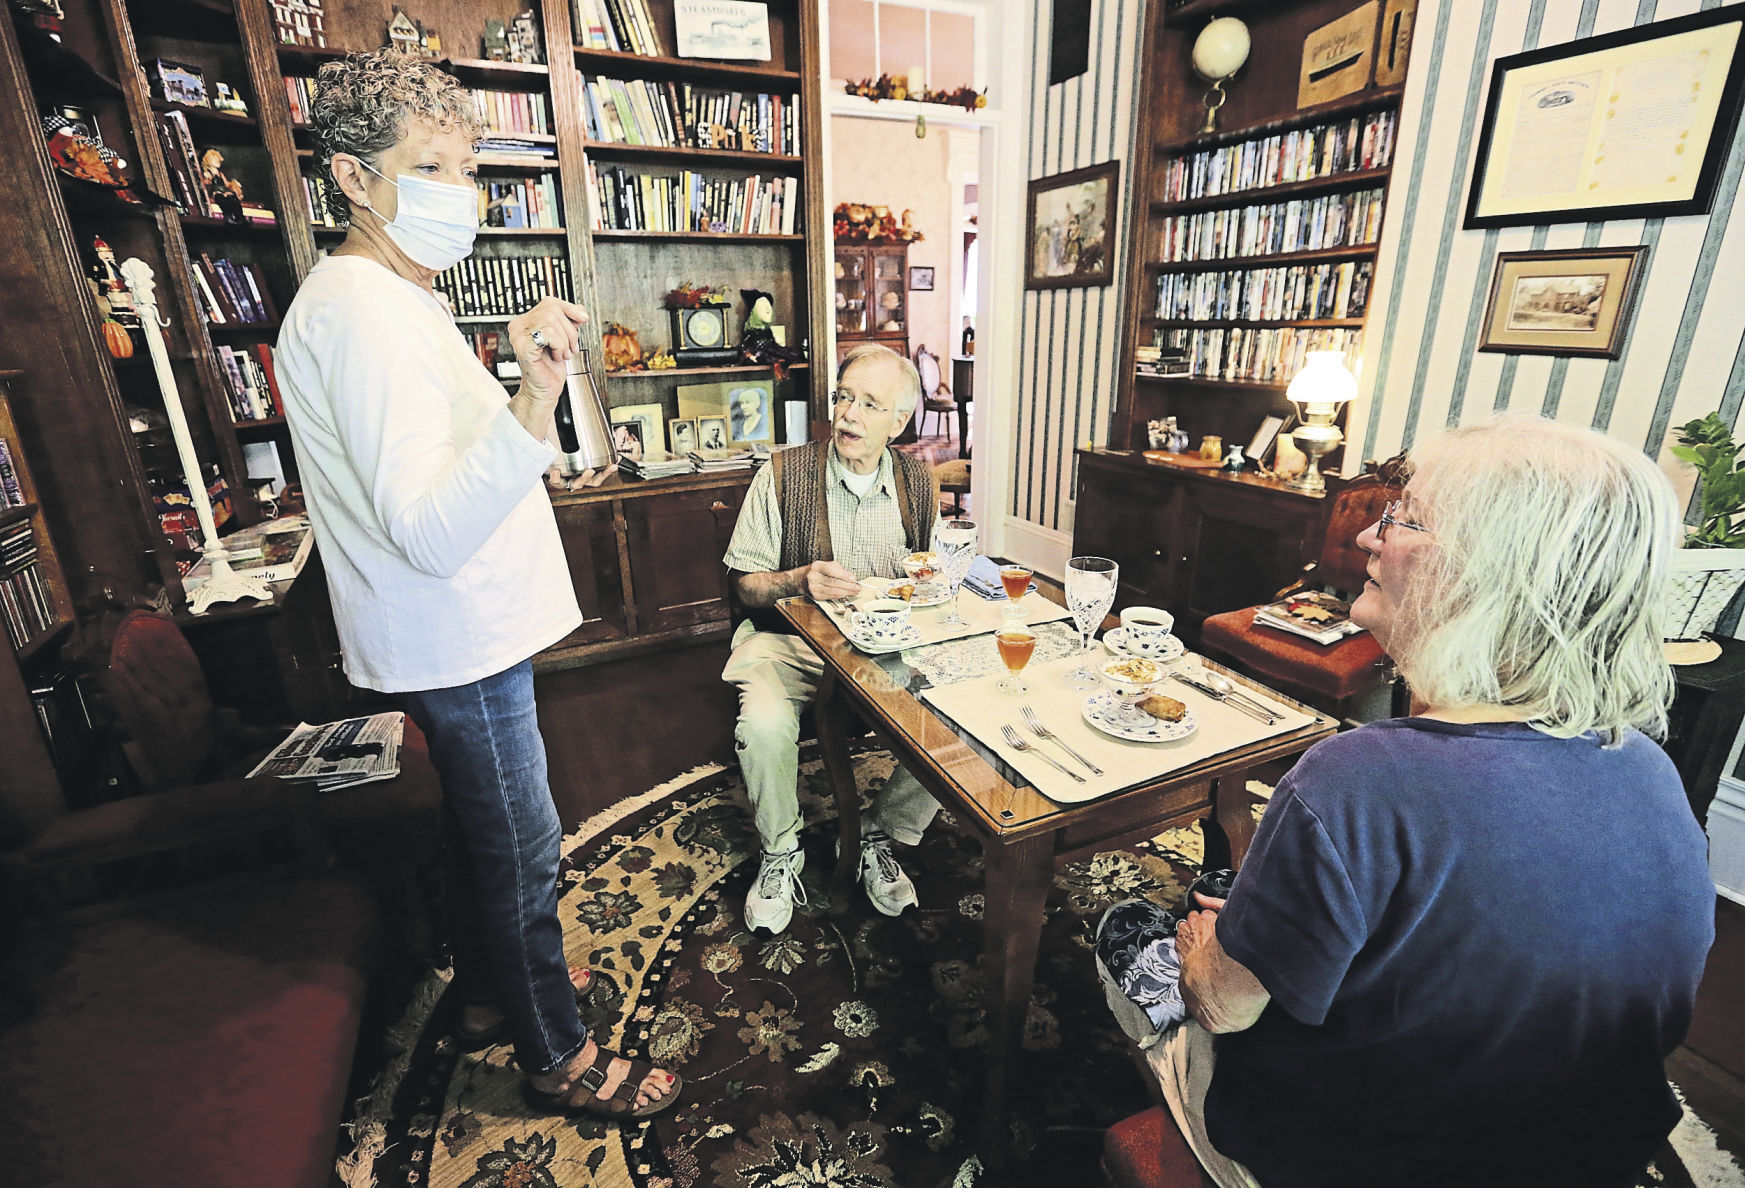 Owner Carol Gebelt (left) talks with Mark Kraemer and his wife, Christine, of Wilmette, Ill., during breakfast at The Steamboat House Bed & Breakfast in Galena, Ill. Besides taking care of their guests, owners of bed-and-breakfasts spend their days jumping from task to task.    PHOTO CREDIT: JESSICA REILLY